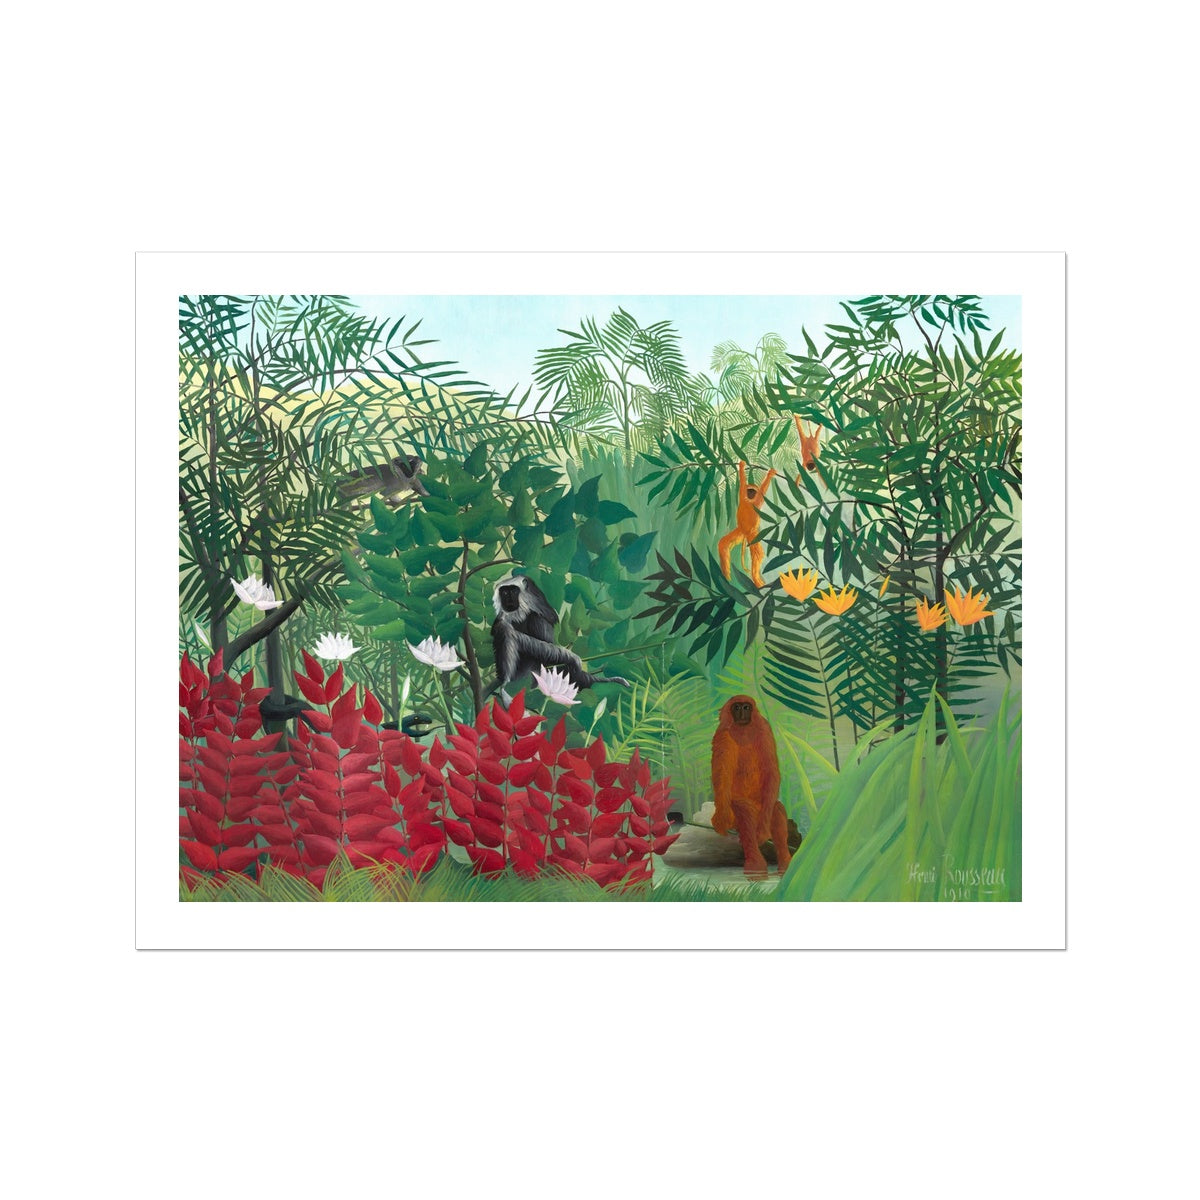 'Tropical Forest with Monkeys' by Henri Rousseau. Open Edition Fine Art Print. Historic Art